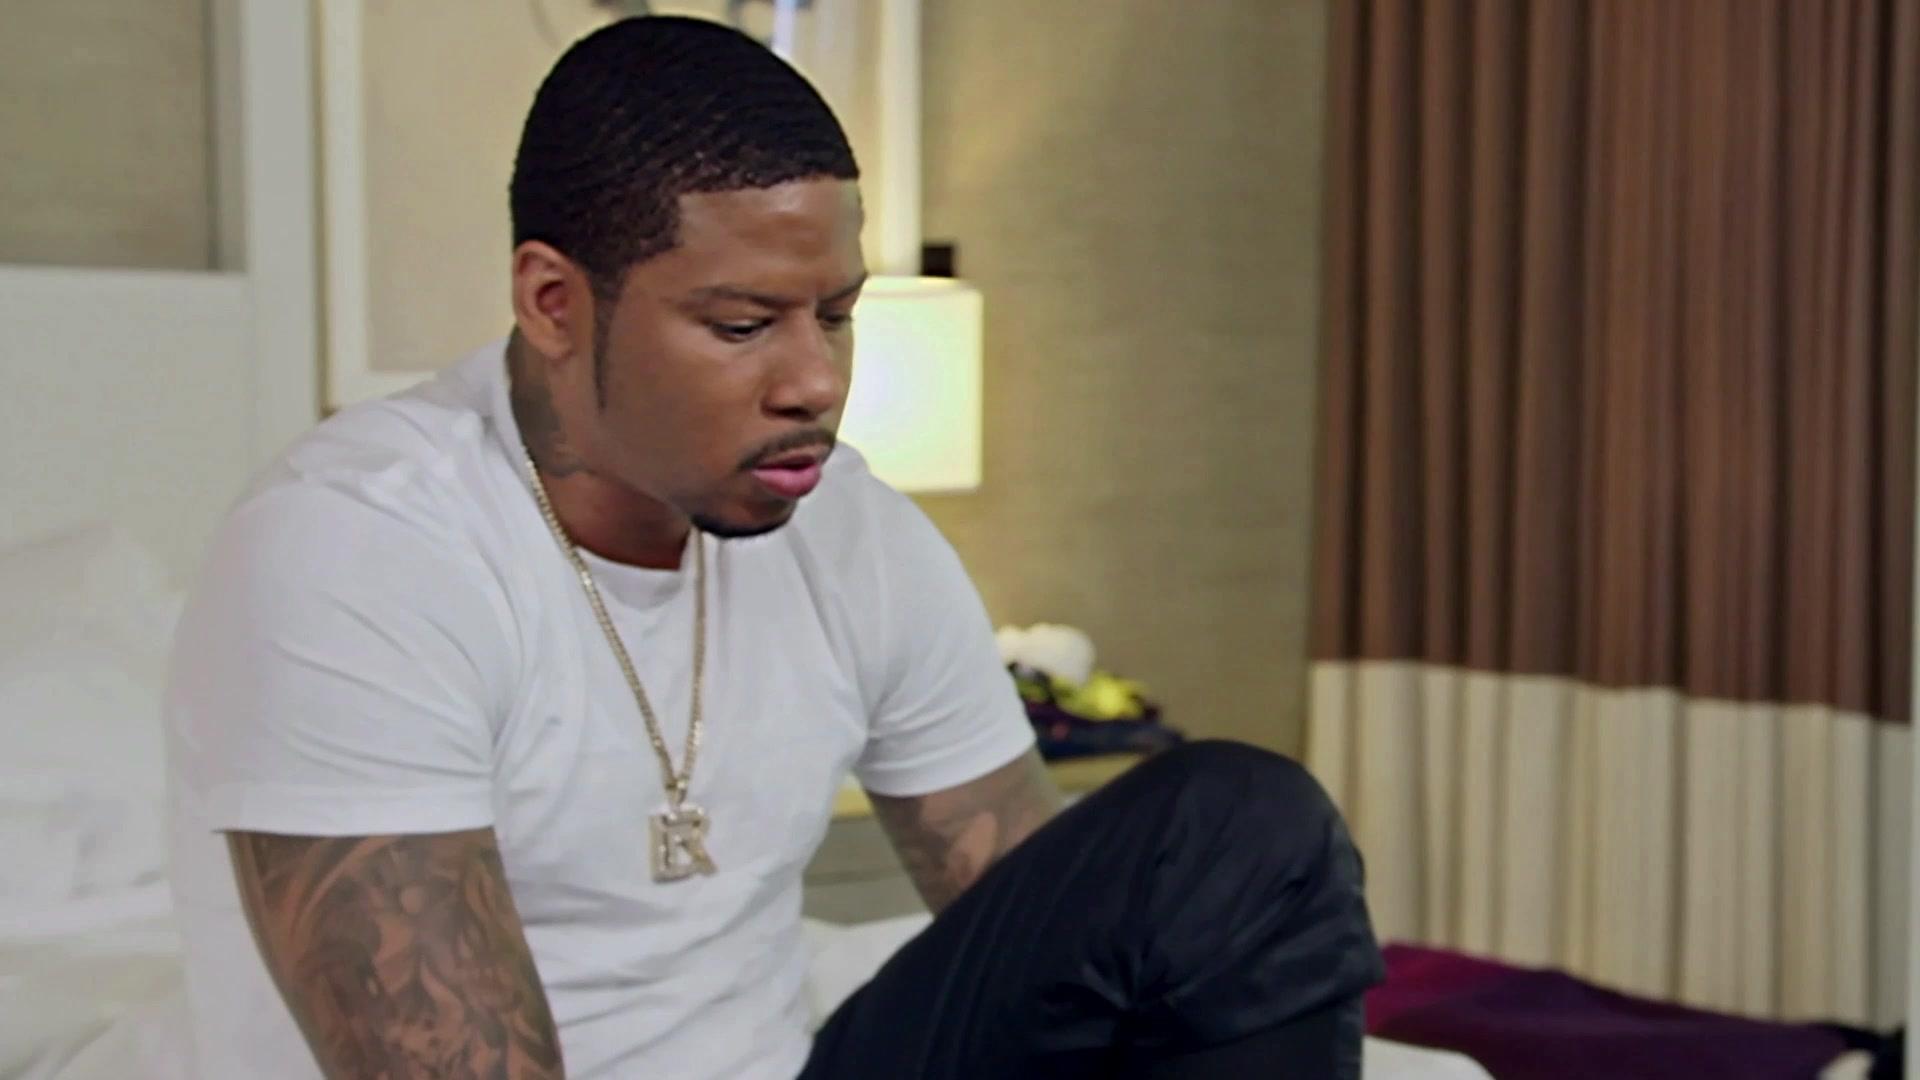 Watch Vado Explains His Actions | Marriage Boot Camp: Hip Hop Edition Video Extras